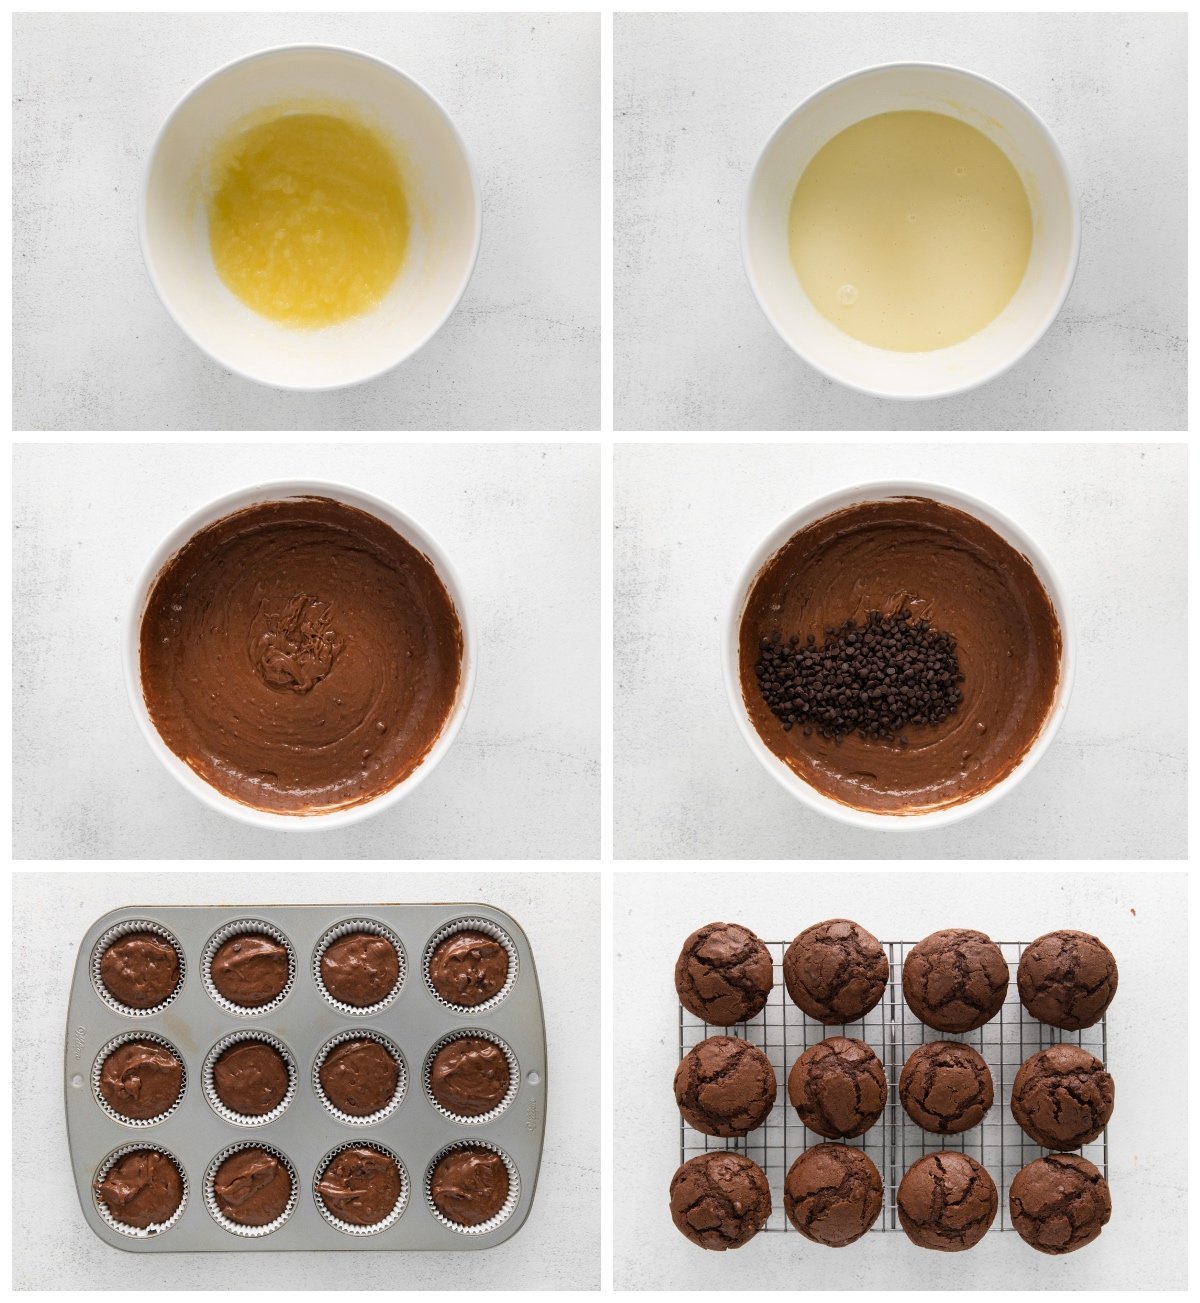 how to make chocolate muffins step by step photo instructions